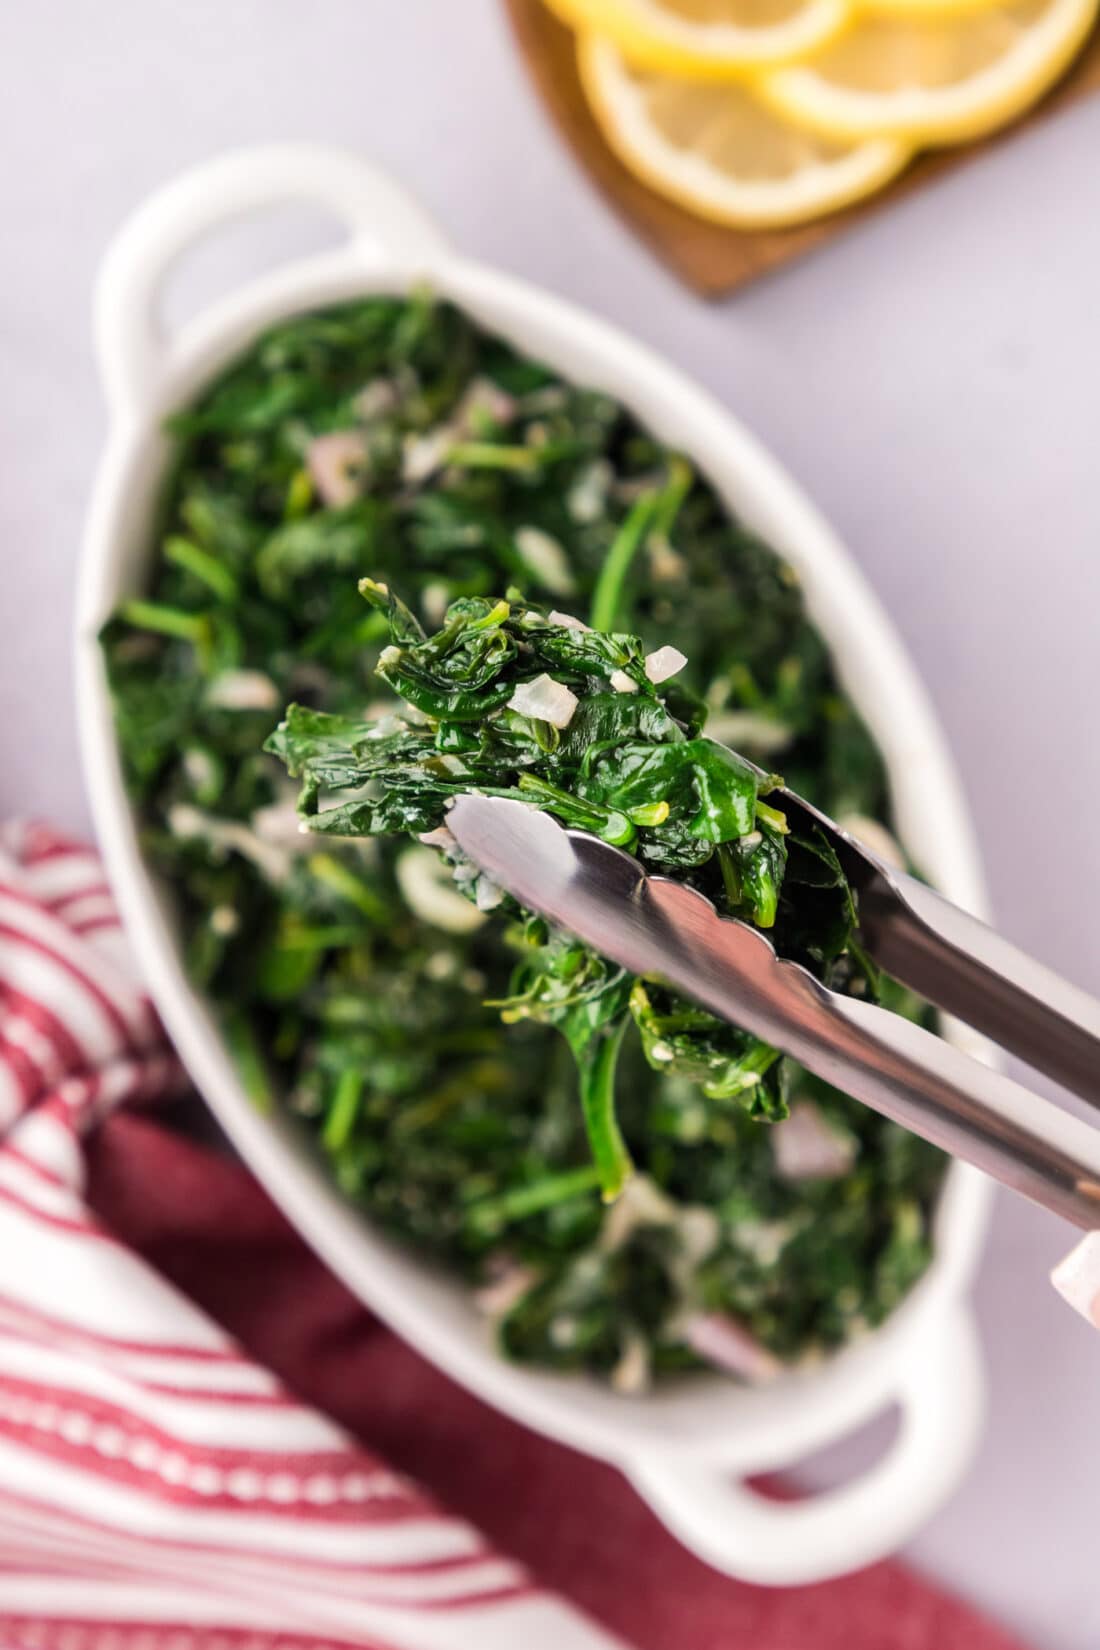 Sautéed Spinach in a pair of tongs